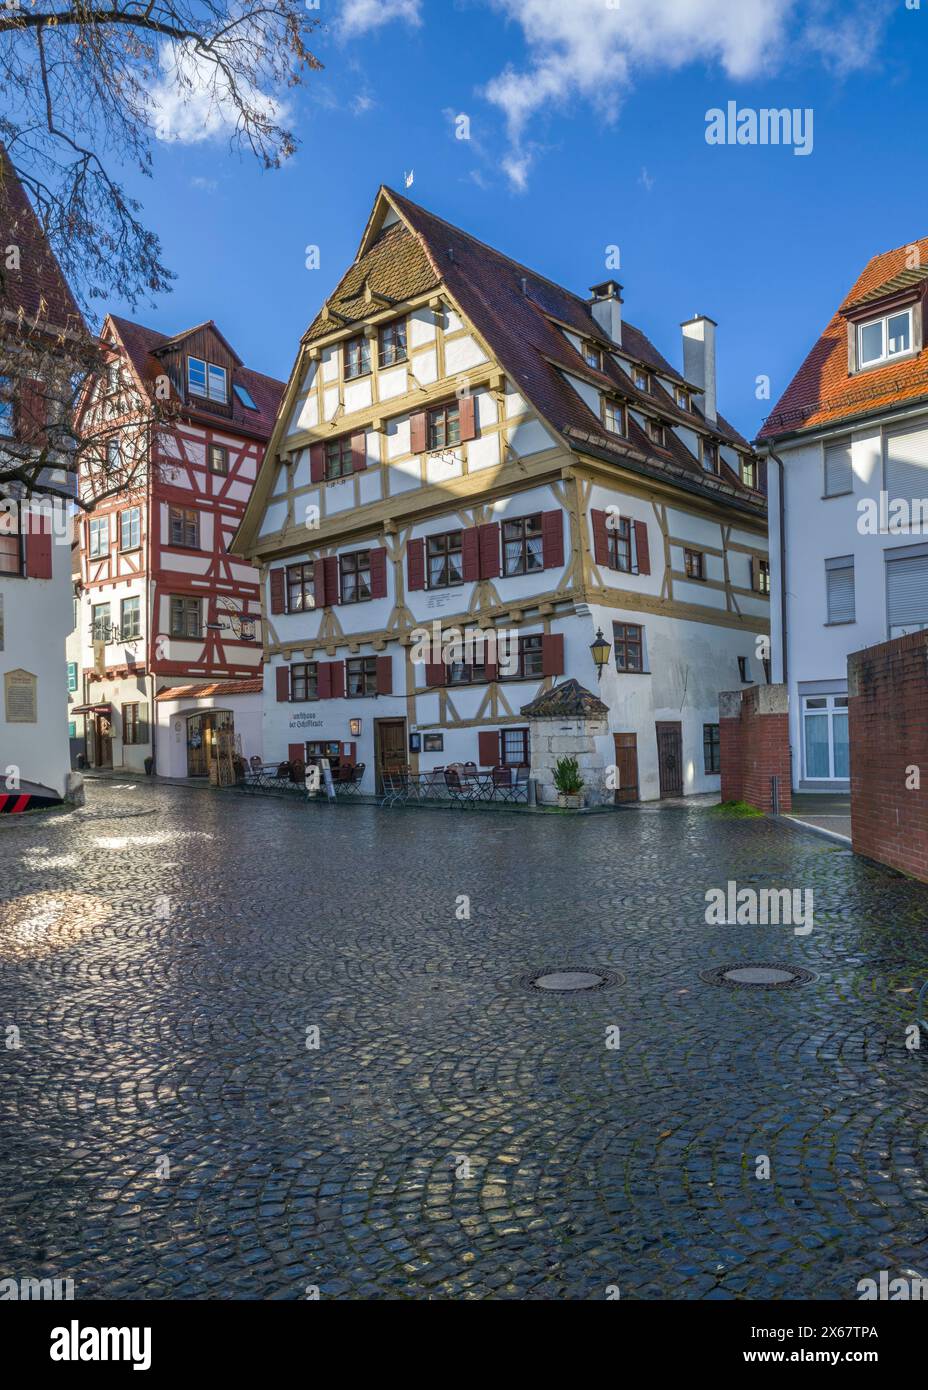 Old half-timbered house, guild house of the boatmen in the fishermen's quarter, Ulm, Baden-Württemberg, Germany Stock Photo